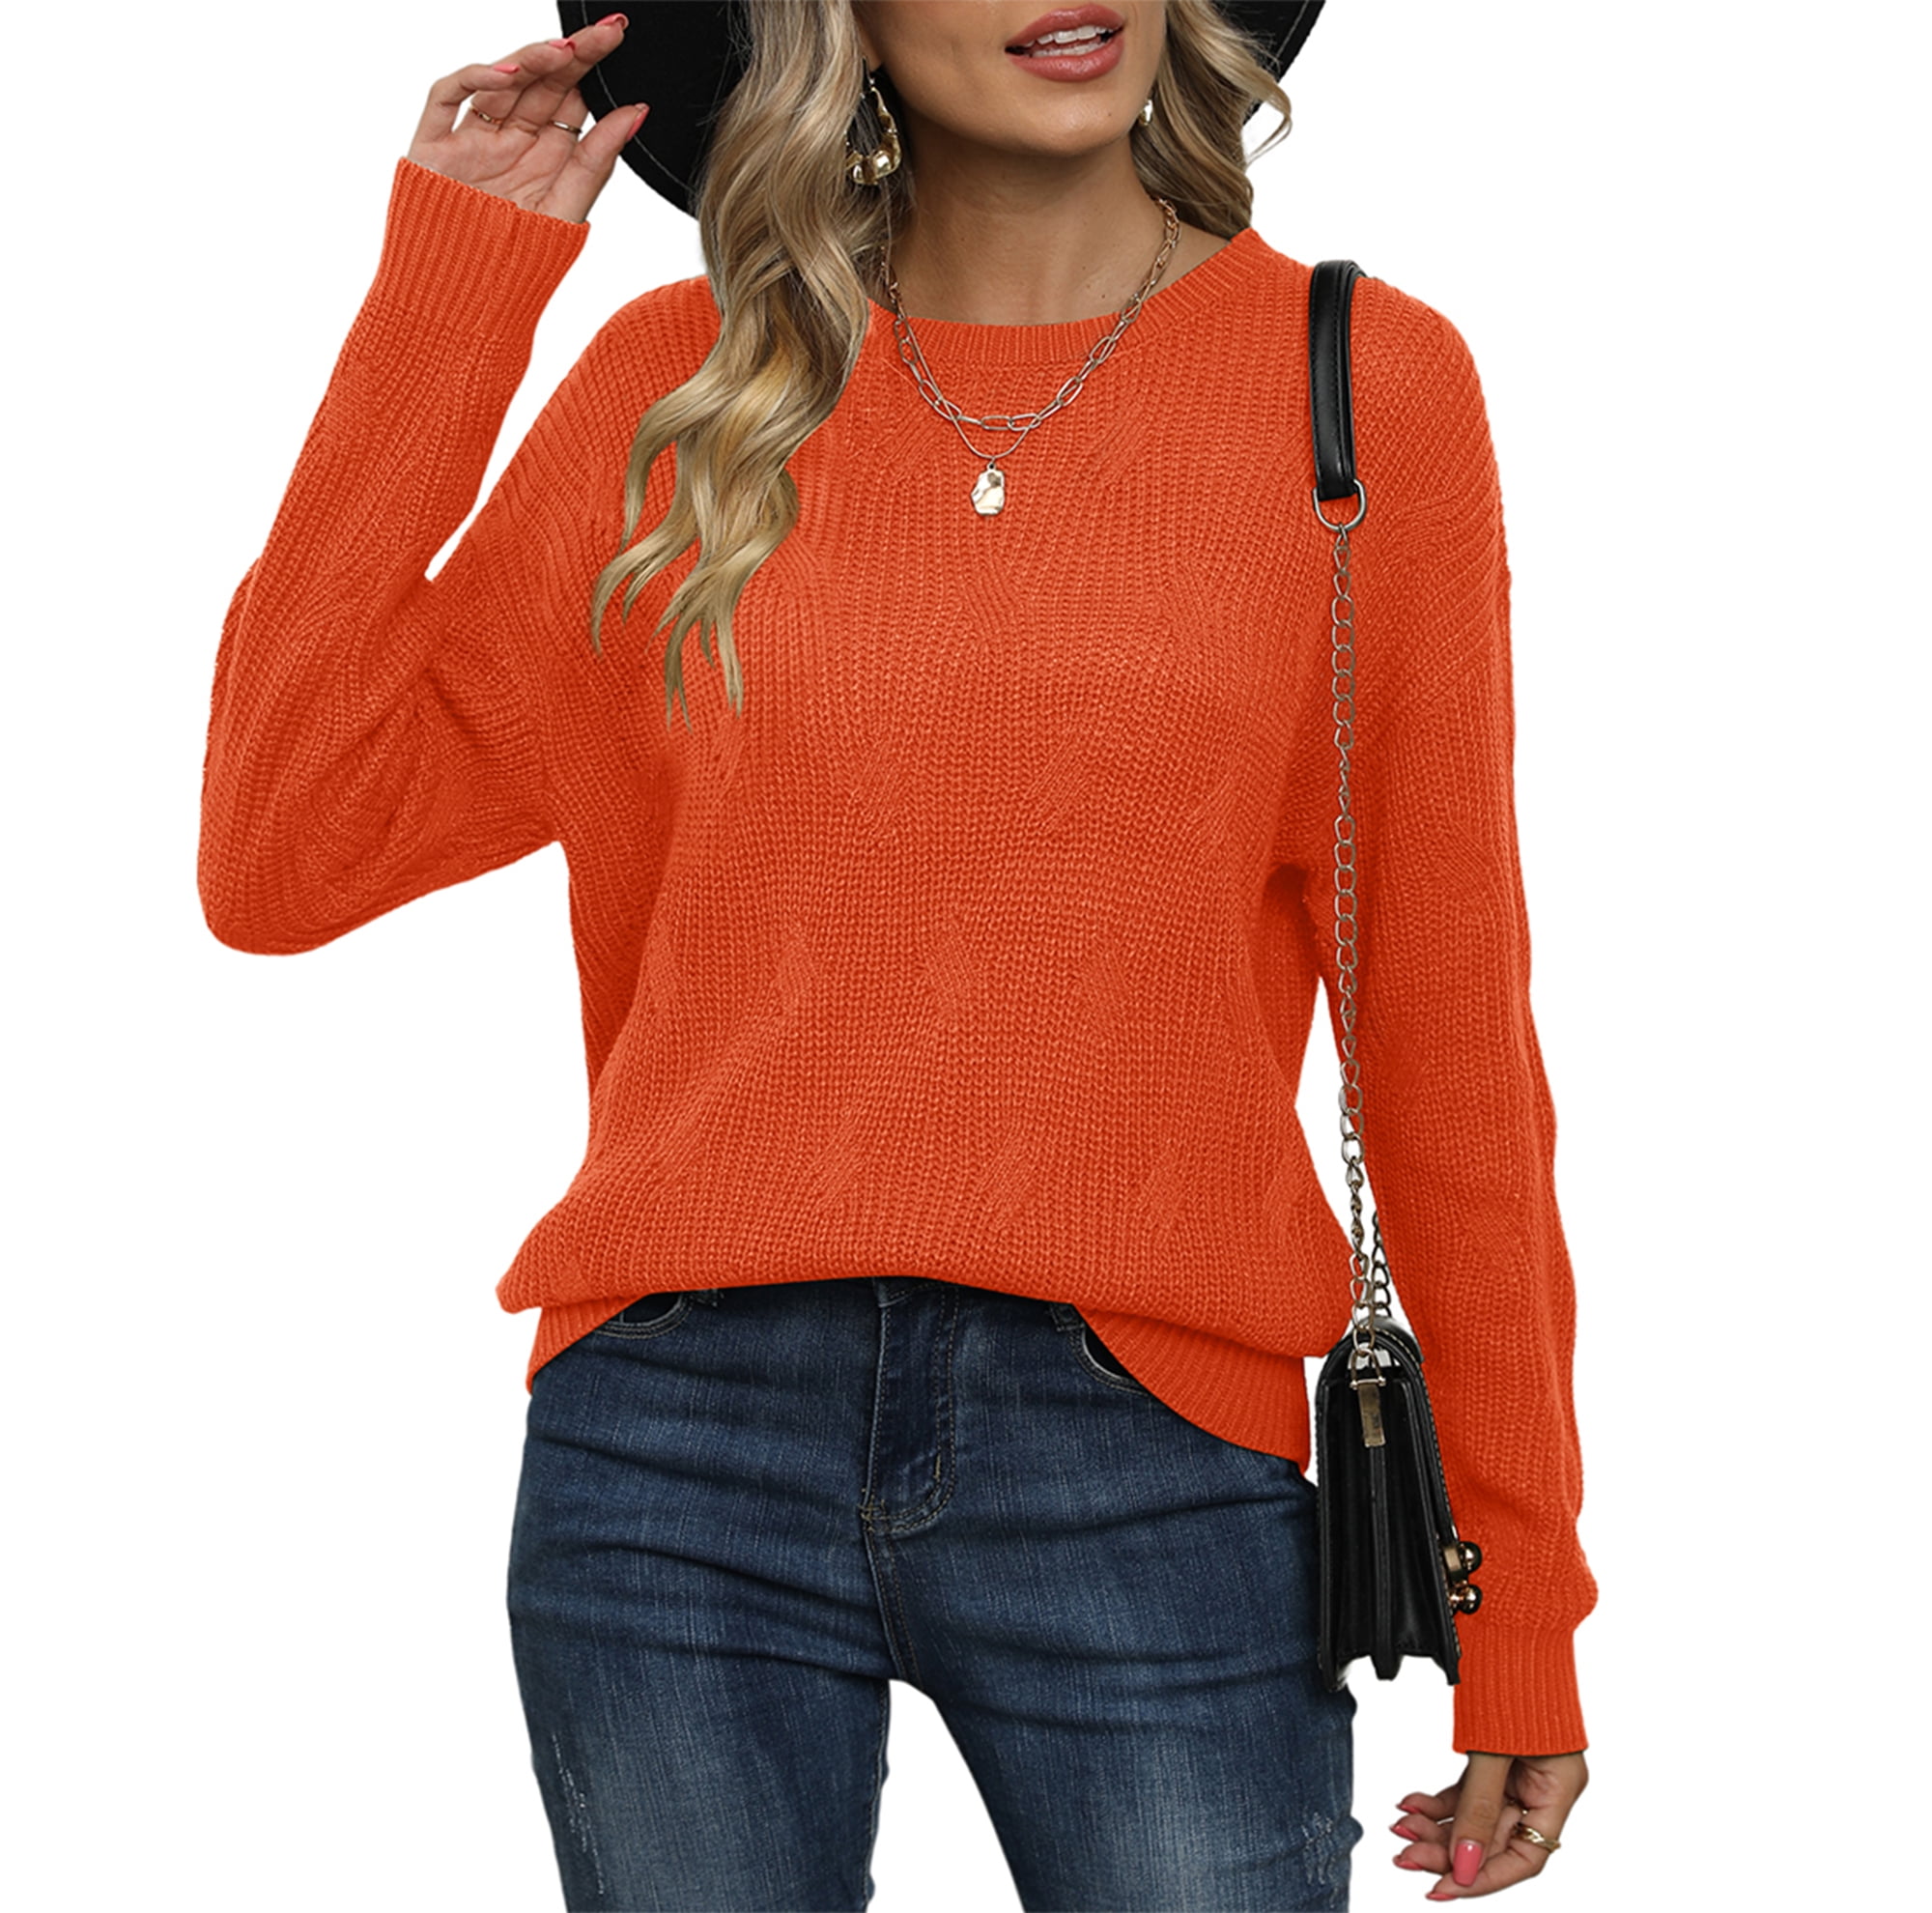 Uvplove Women's Fall Lightweight Sweater Knit Casual Pullovers Sweaters ...